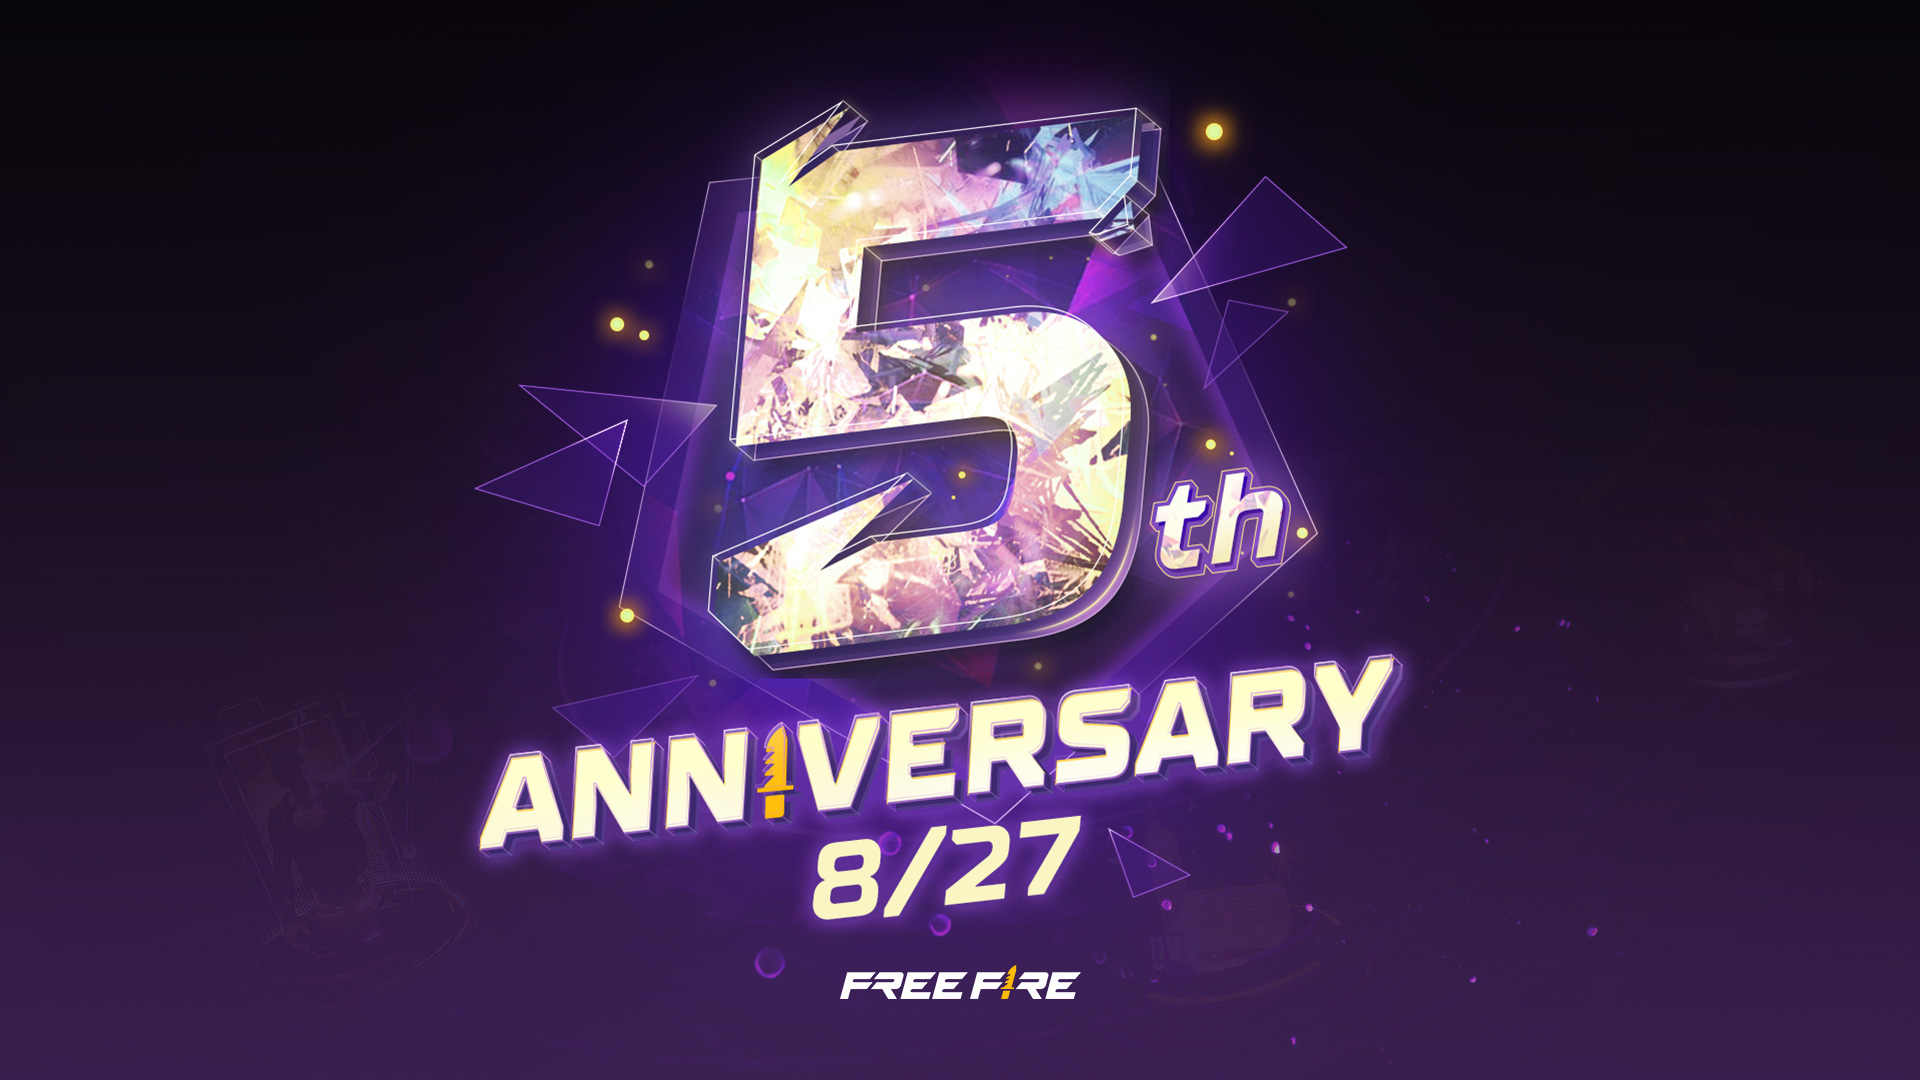 GEAR UP FOR FREE FIRE’S 5TH ANNIVERSARY CELEBRATIONS WITH JUSTIN BIEBER